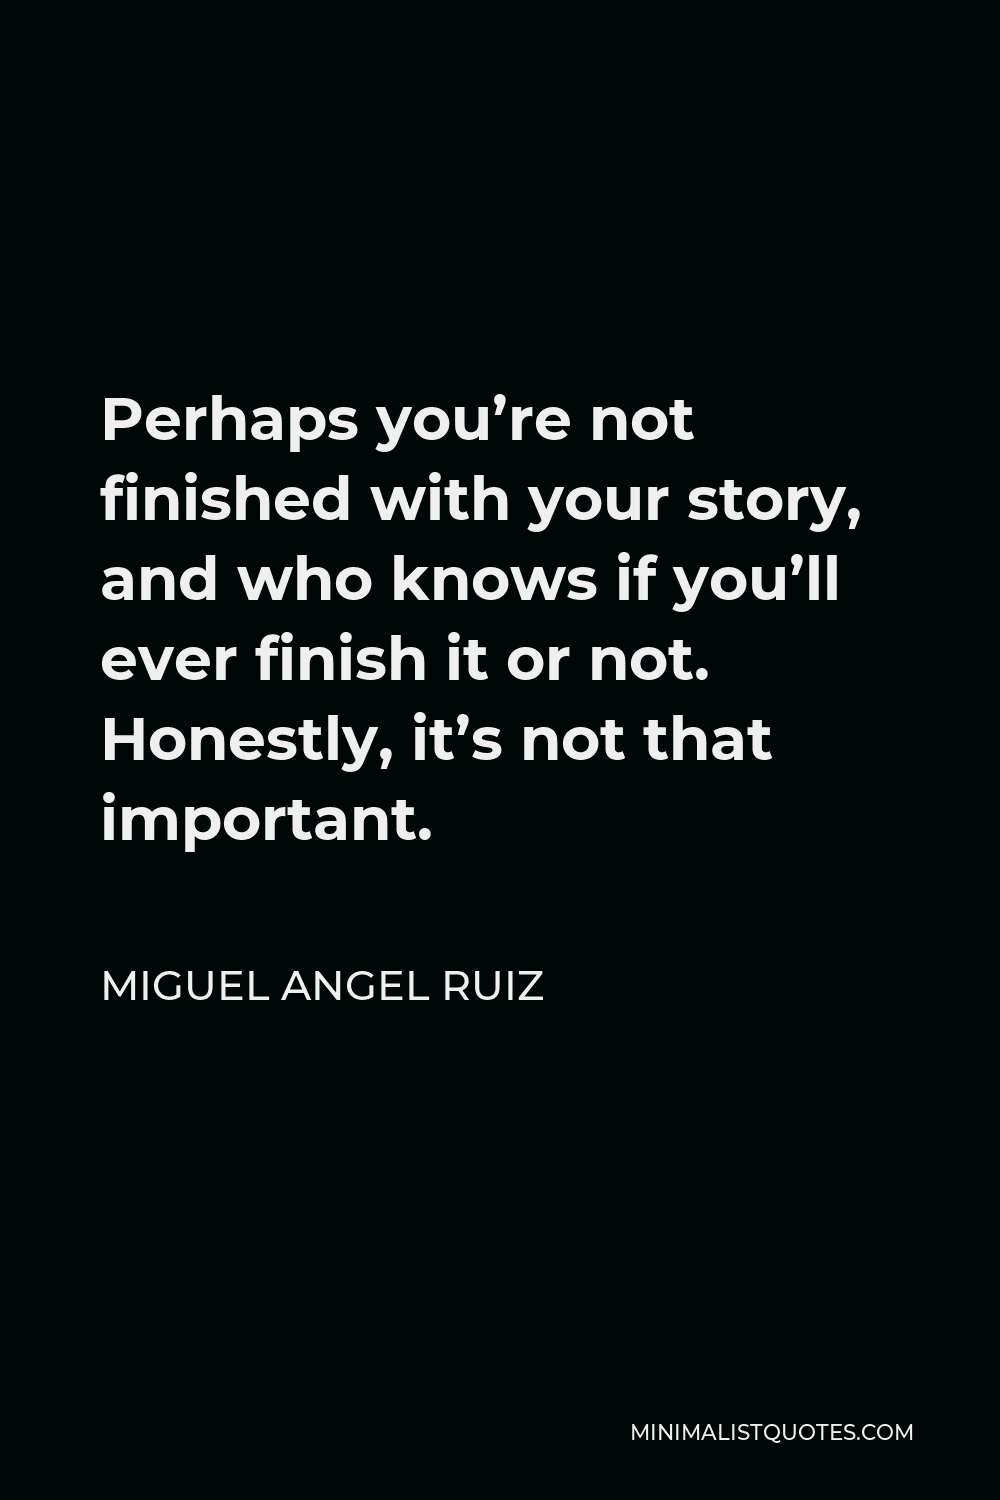 Miguel Angel Ruiz Quote - Perhaps you’re not finished with your story, and who knows if you’ll ever finish it or not. Honestly, it’s not that important.